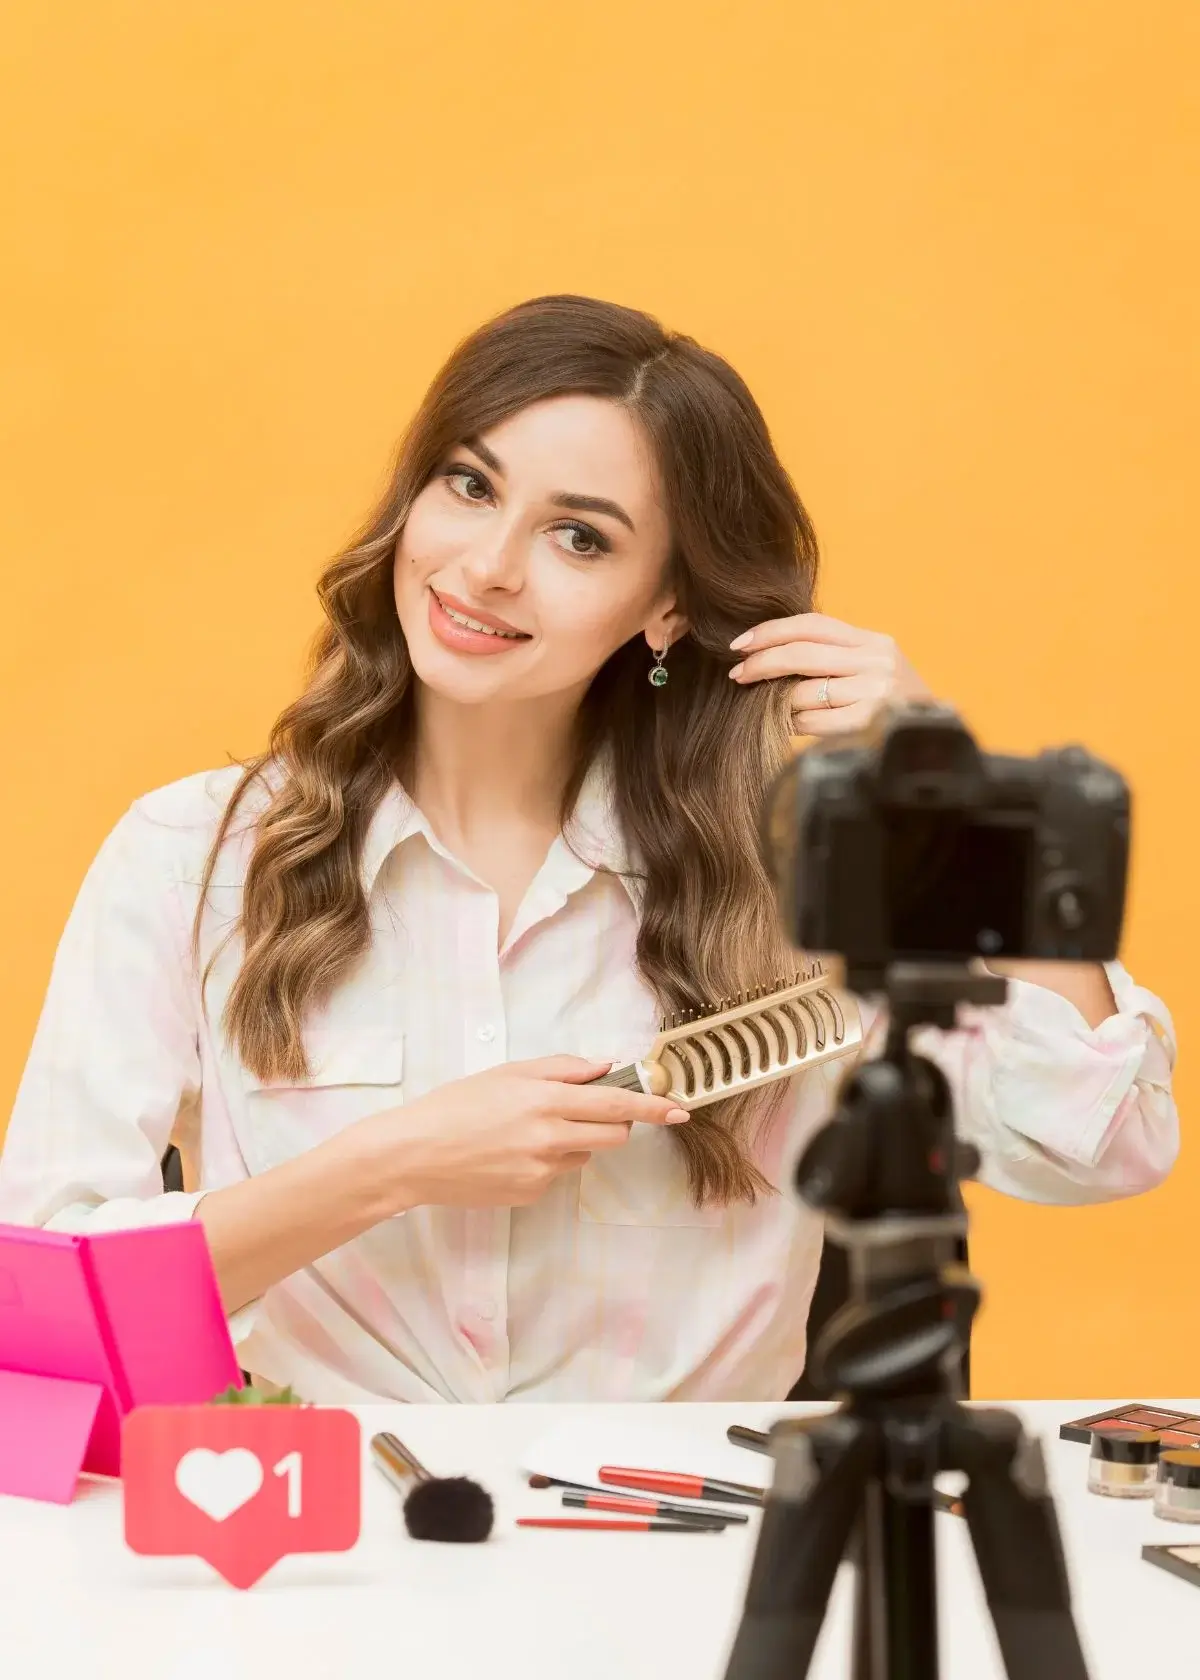 What ethical considerations apply to TikTok beauty content?